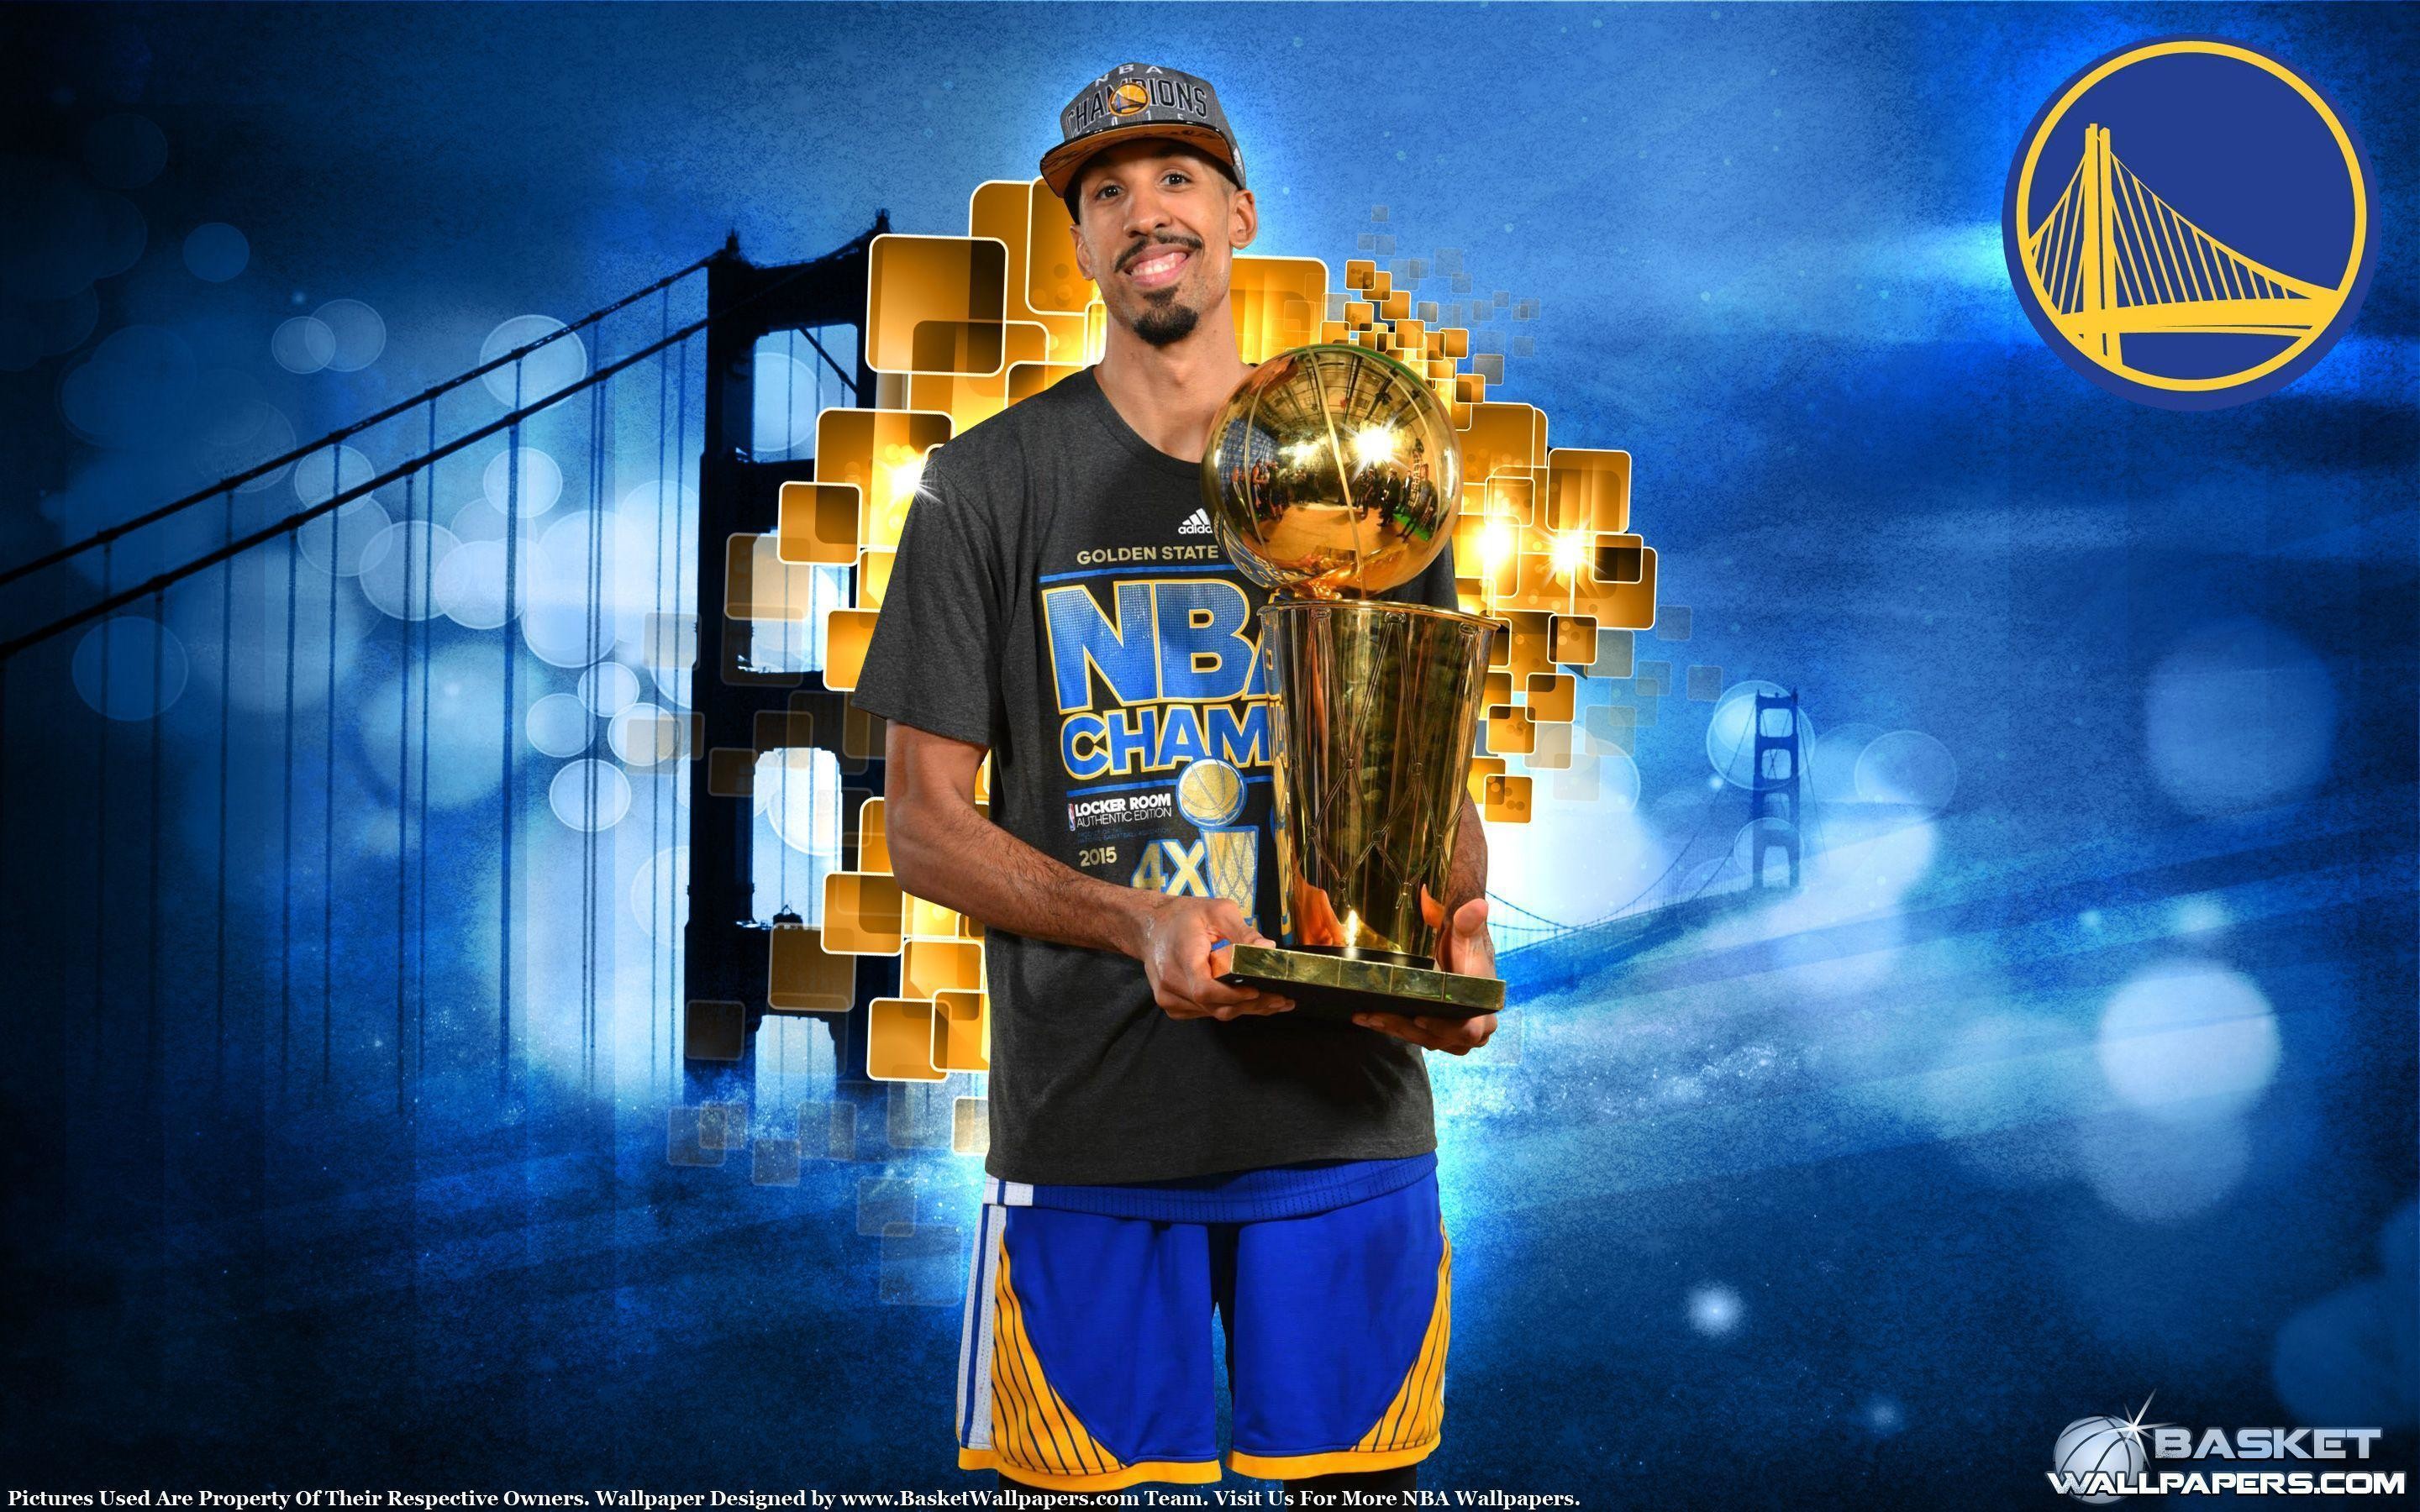 2880x1800 Golden State Warriors Wallpapers | Basketball Wallpapers at .